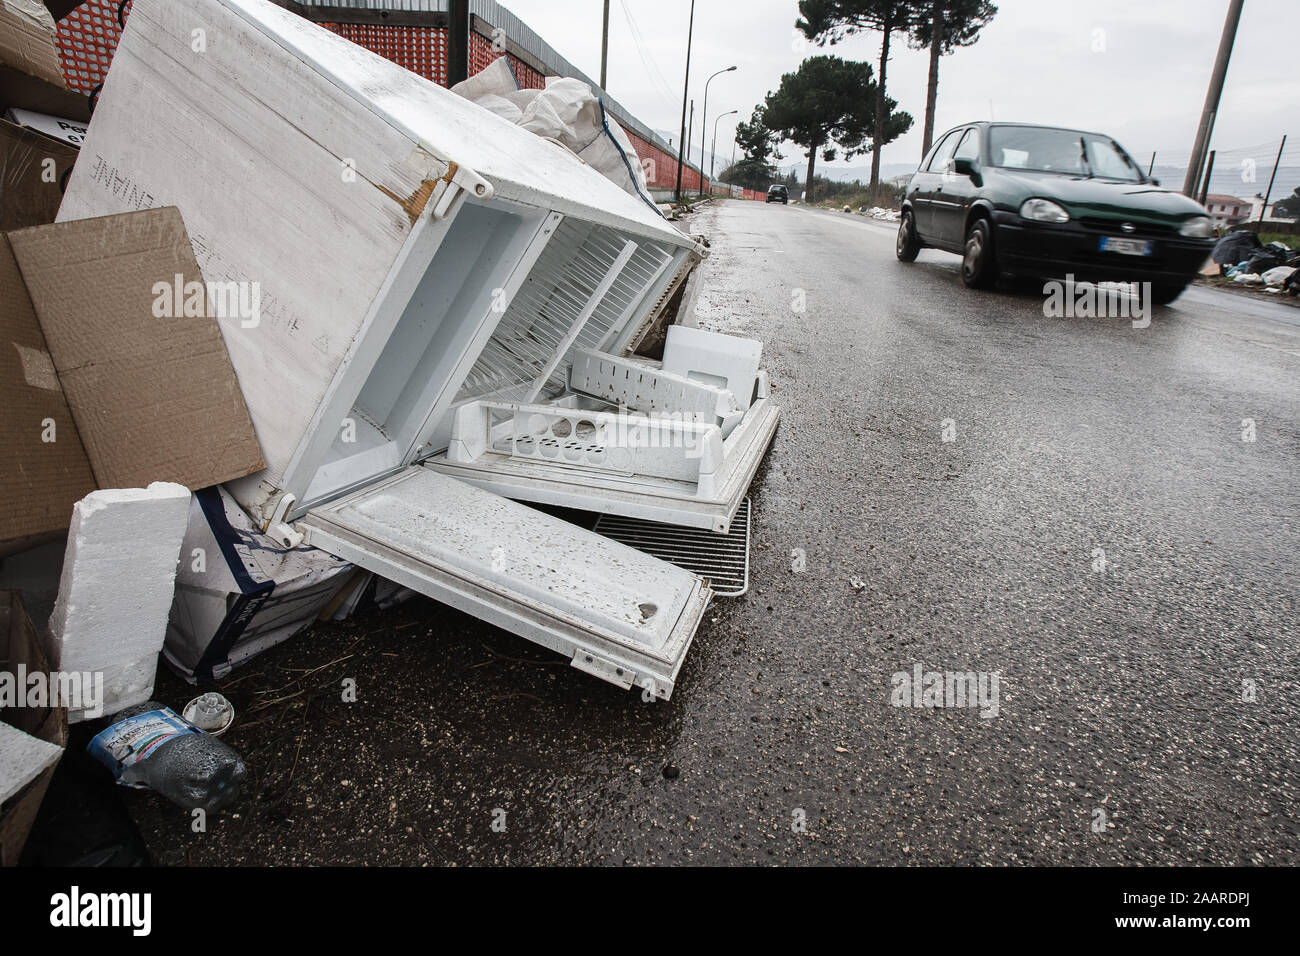 Caserta, Italy, February 21, 2008: A discarded refrigirator by the side of the road in Caserta, Italy, north of Naples during the Naples waste management crisis in 2008. Stock Photo